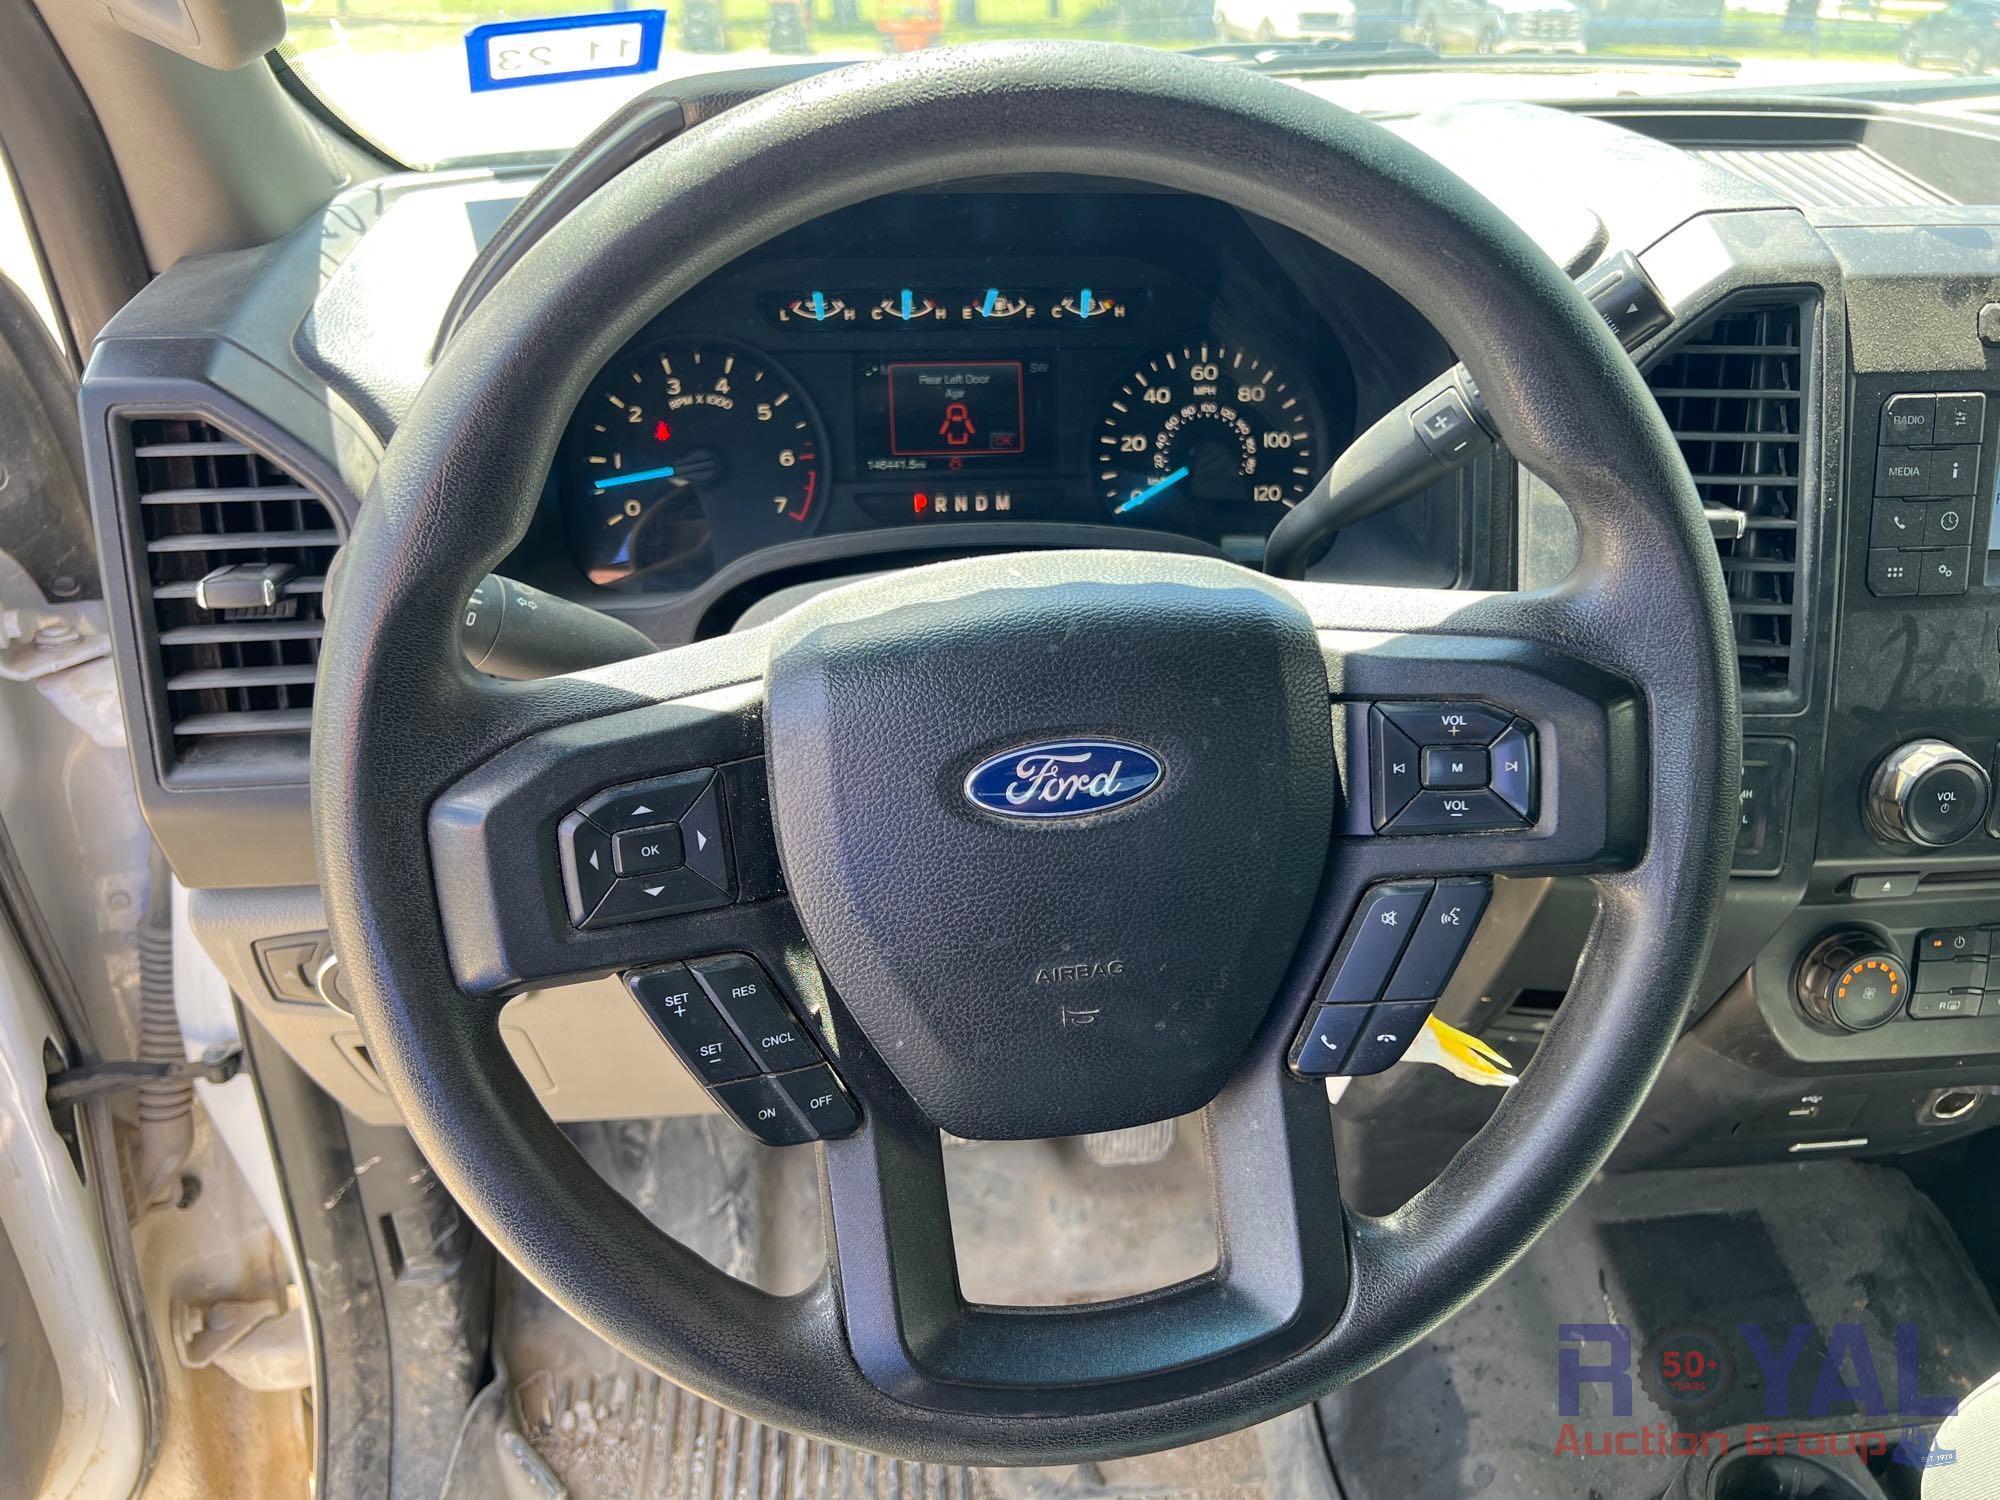 2018 Ford F150 4x4 Extended Cab Pickup Truck